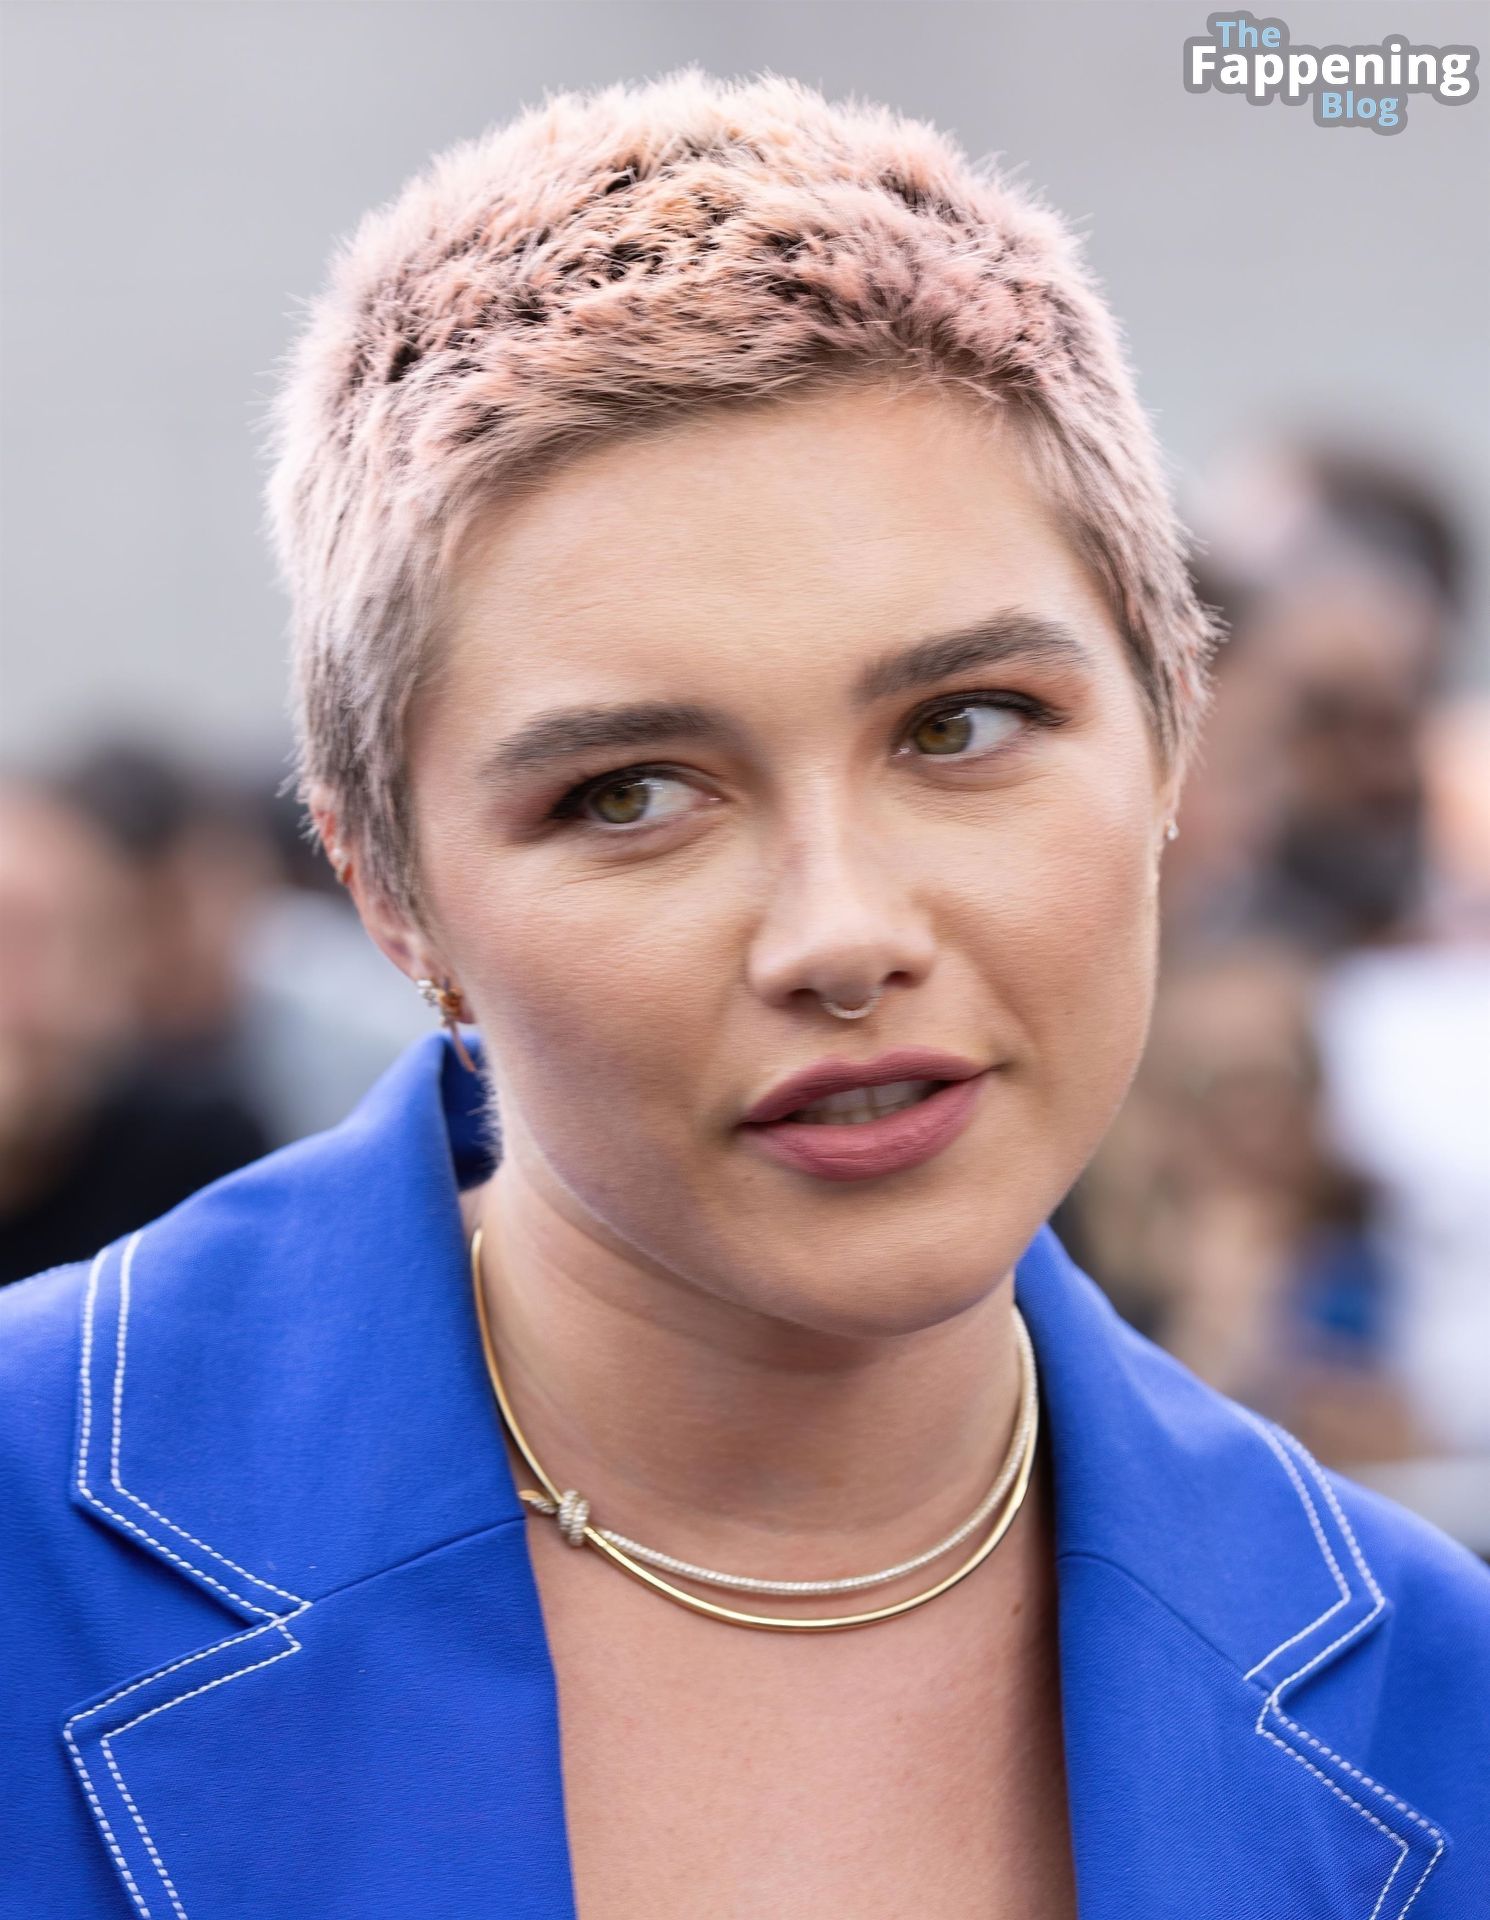 Florence-Pugh-Sexy-The-Fappening-Blog-32.jpg